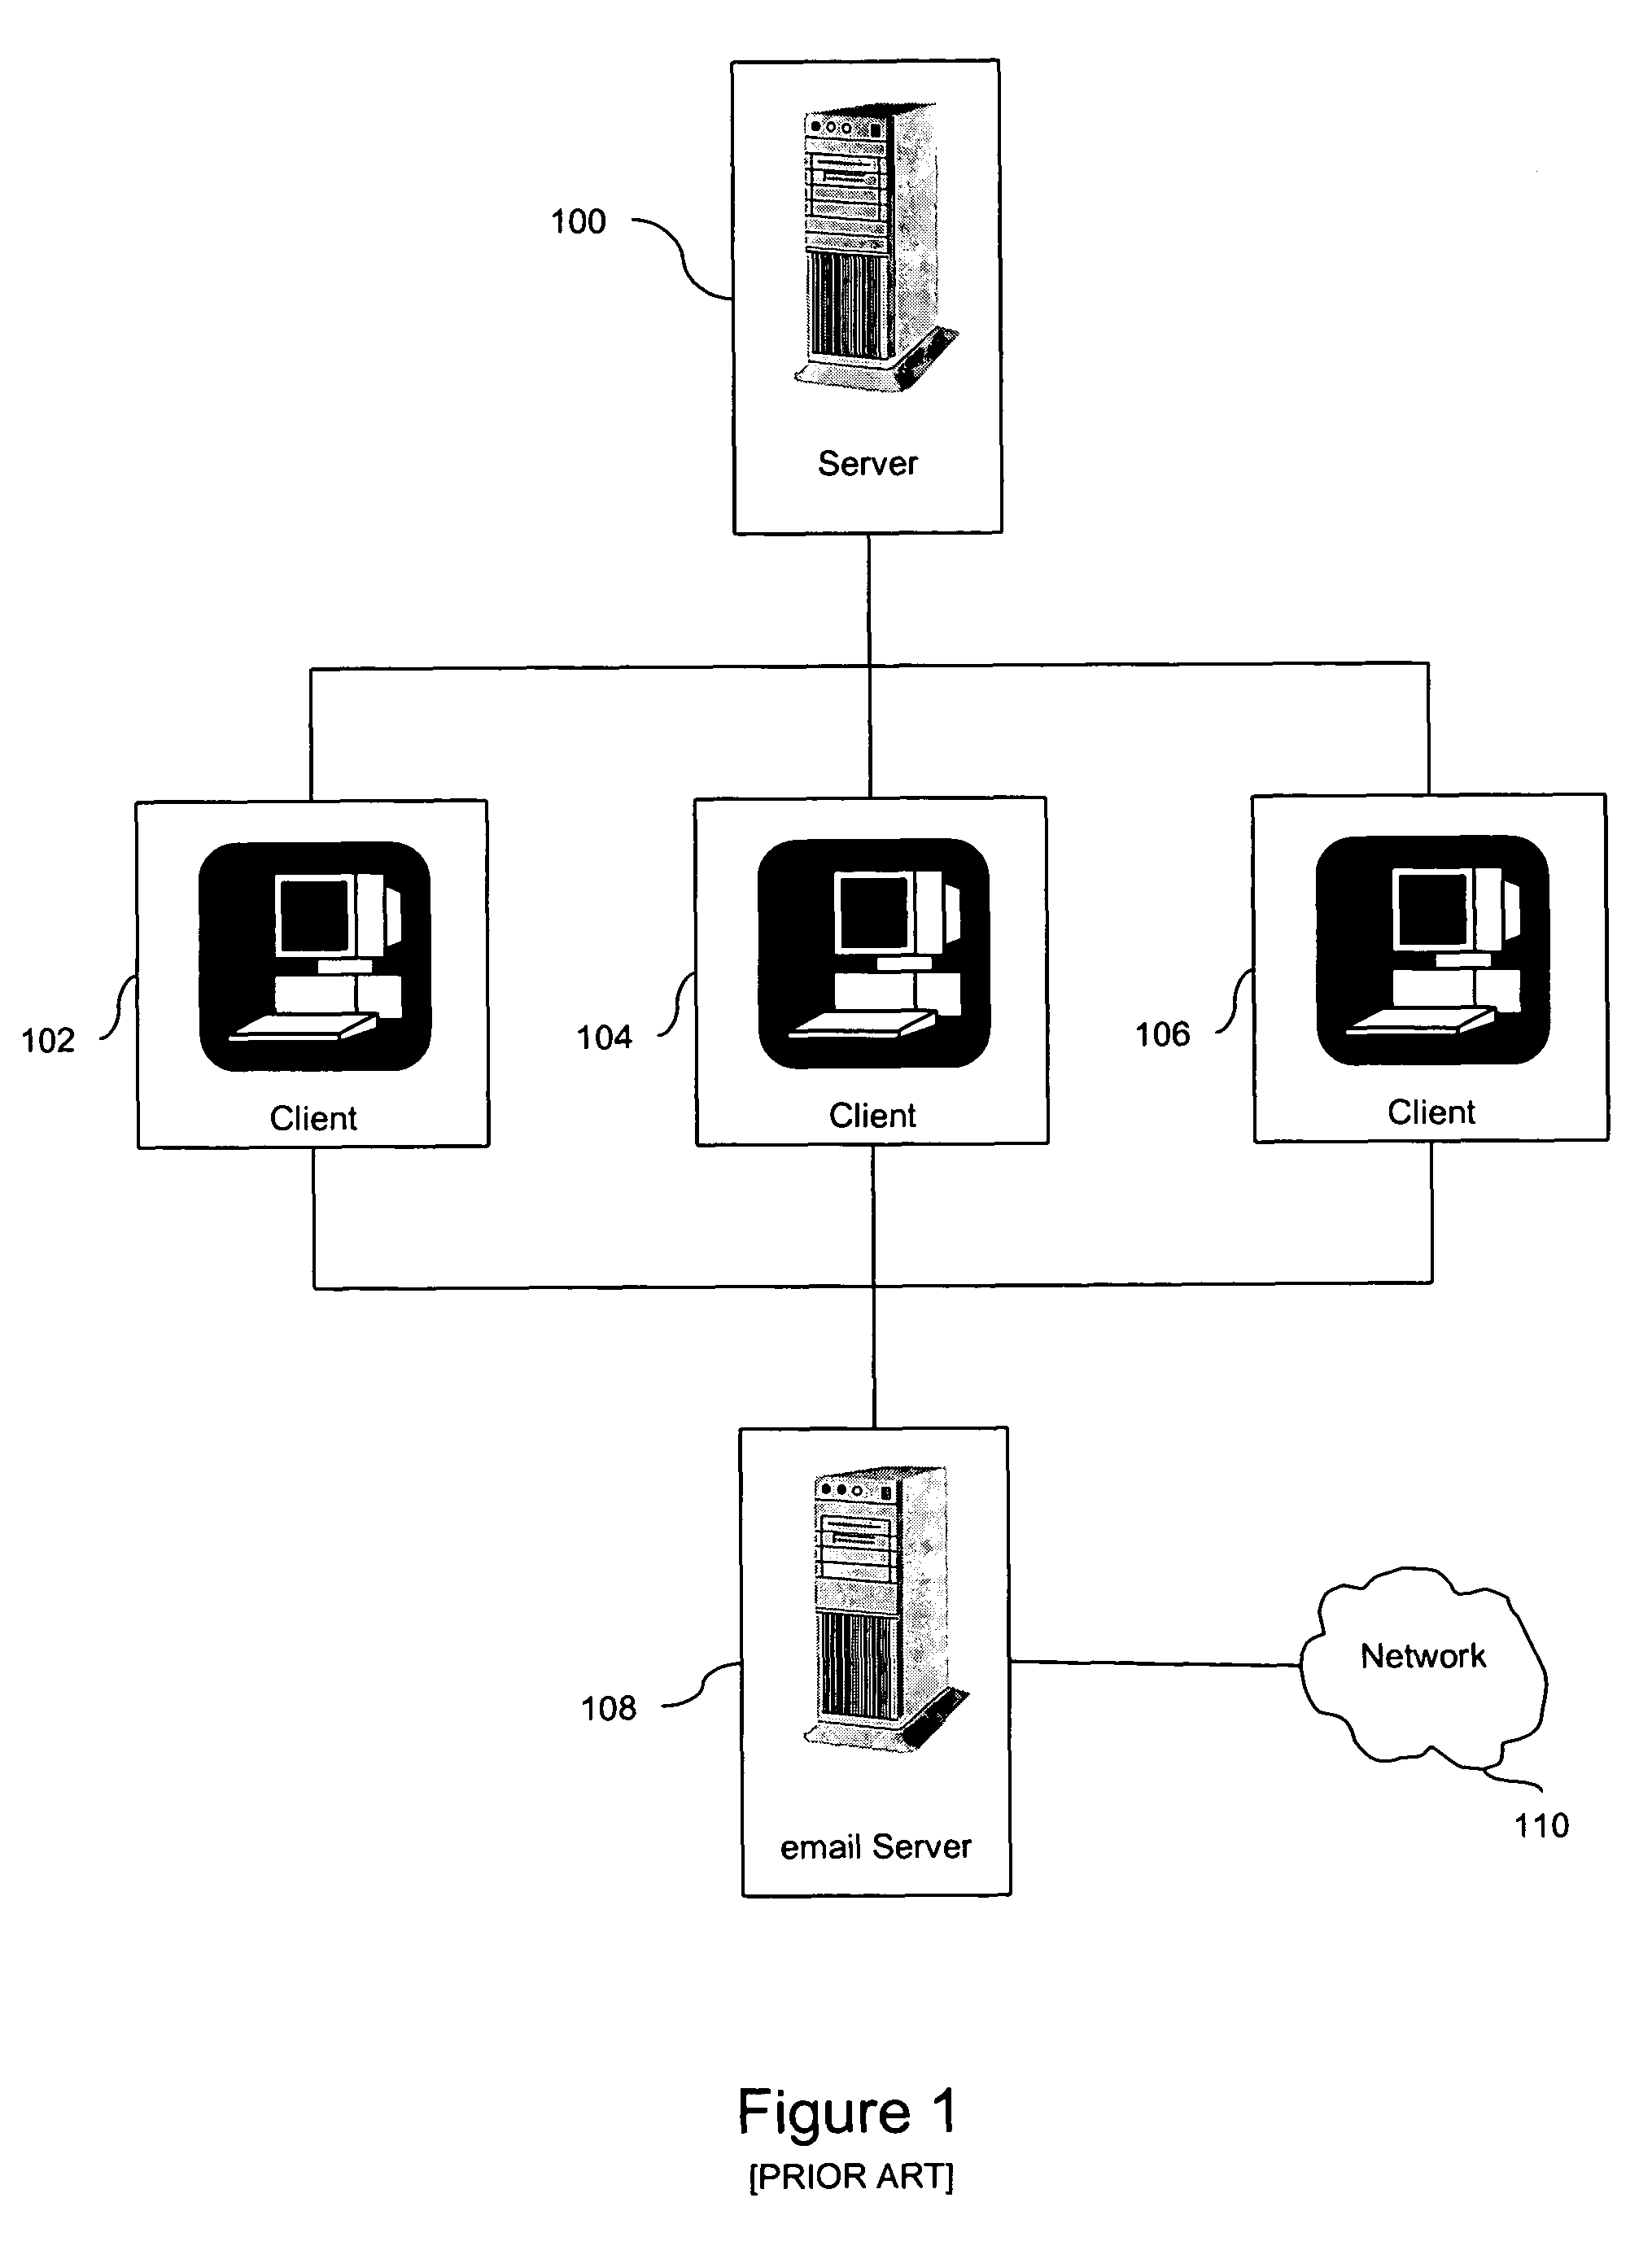 System and method for sending electronic mail in a client-server architecture